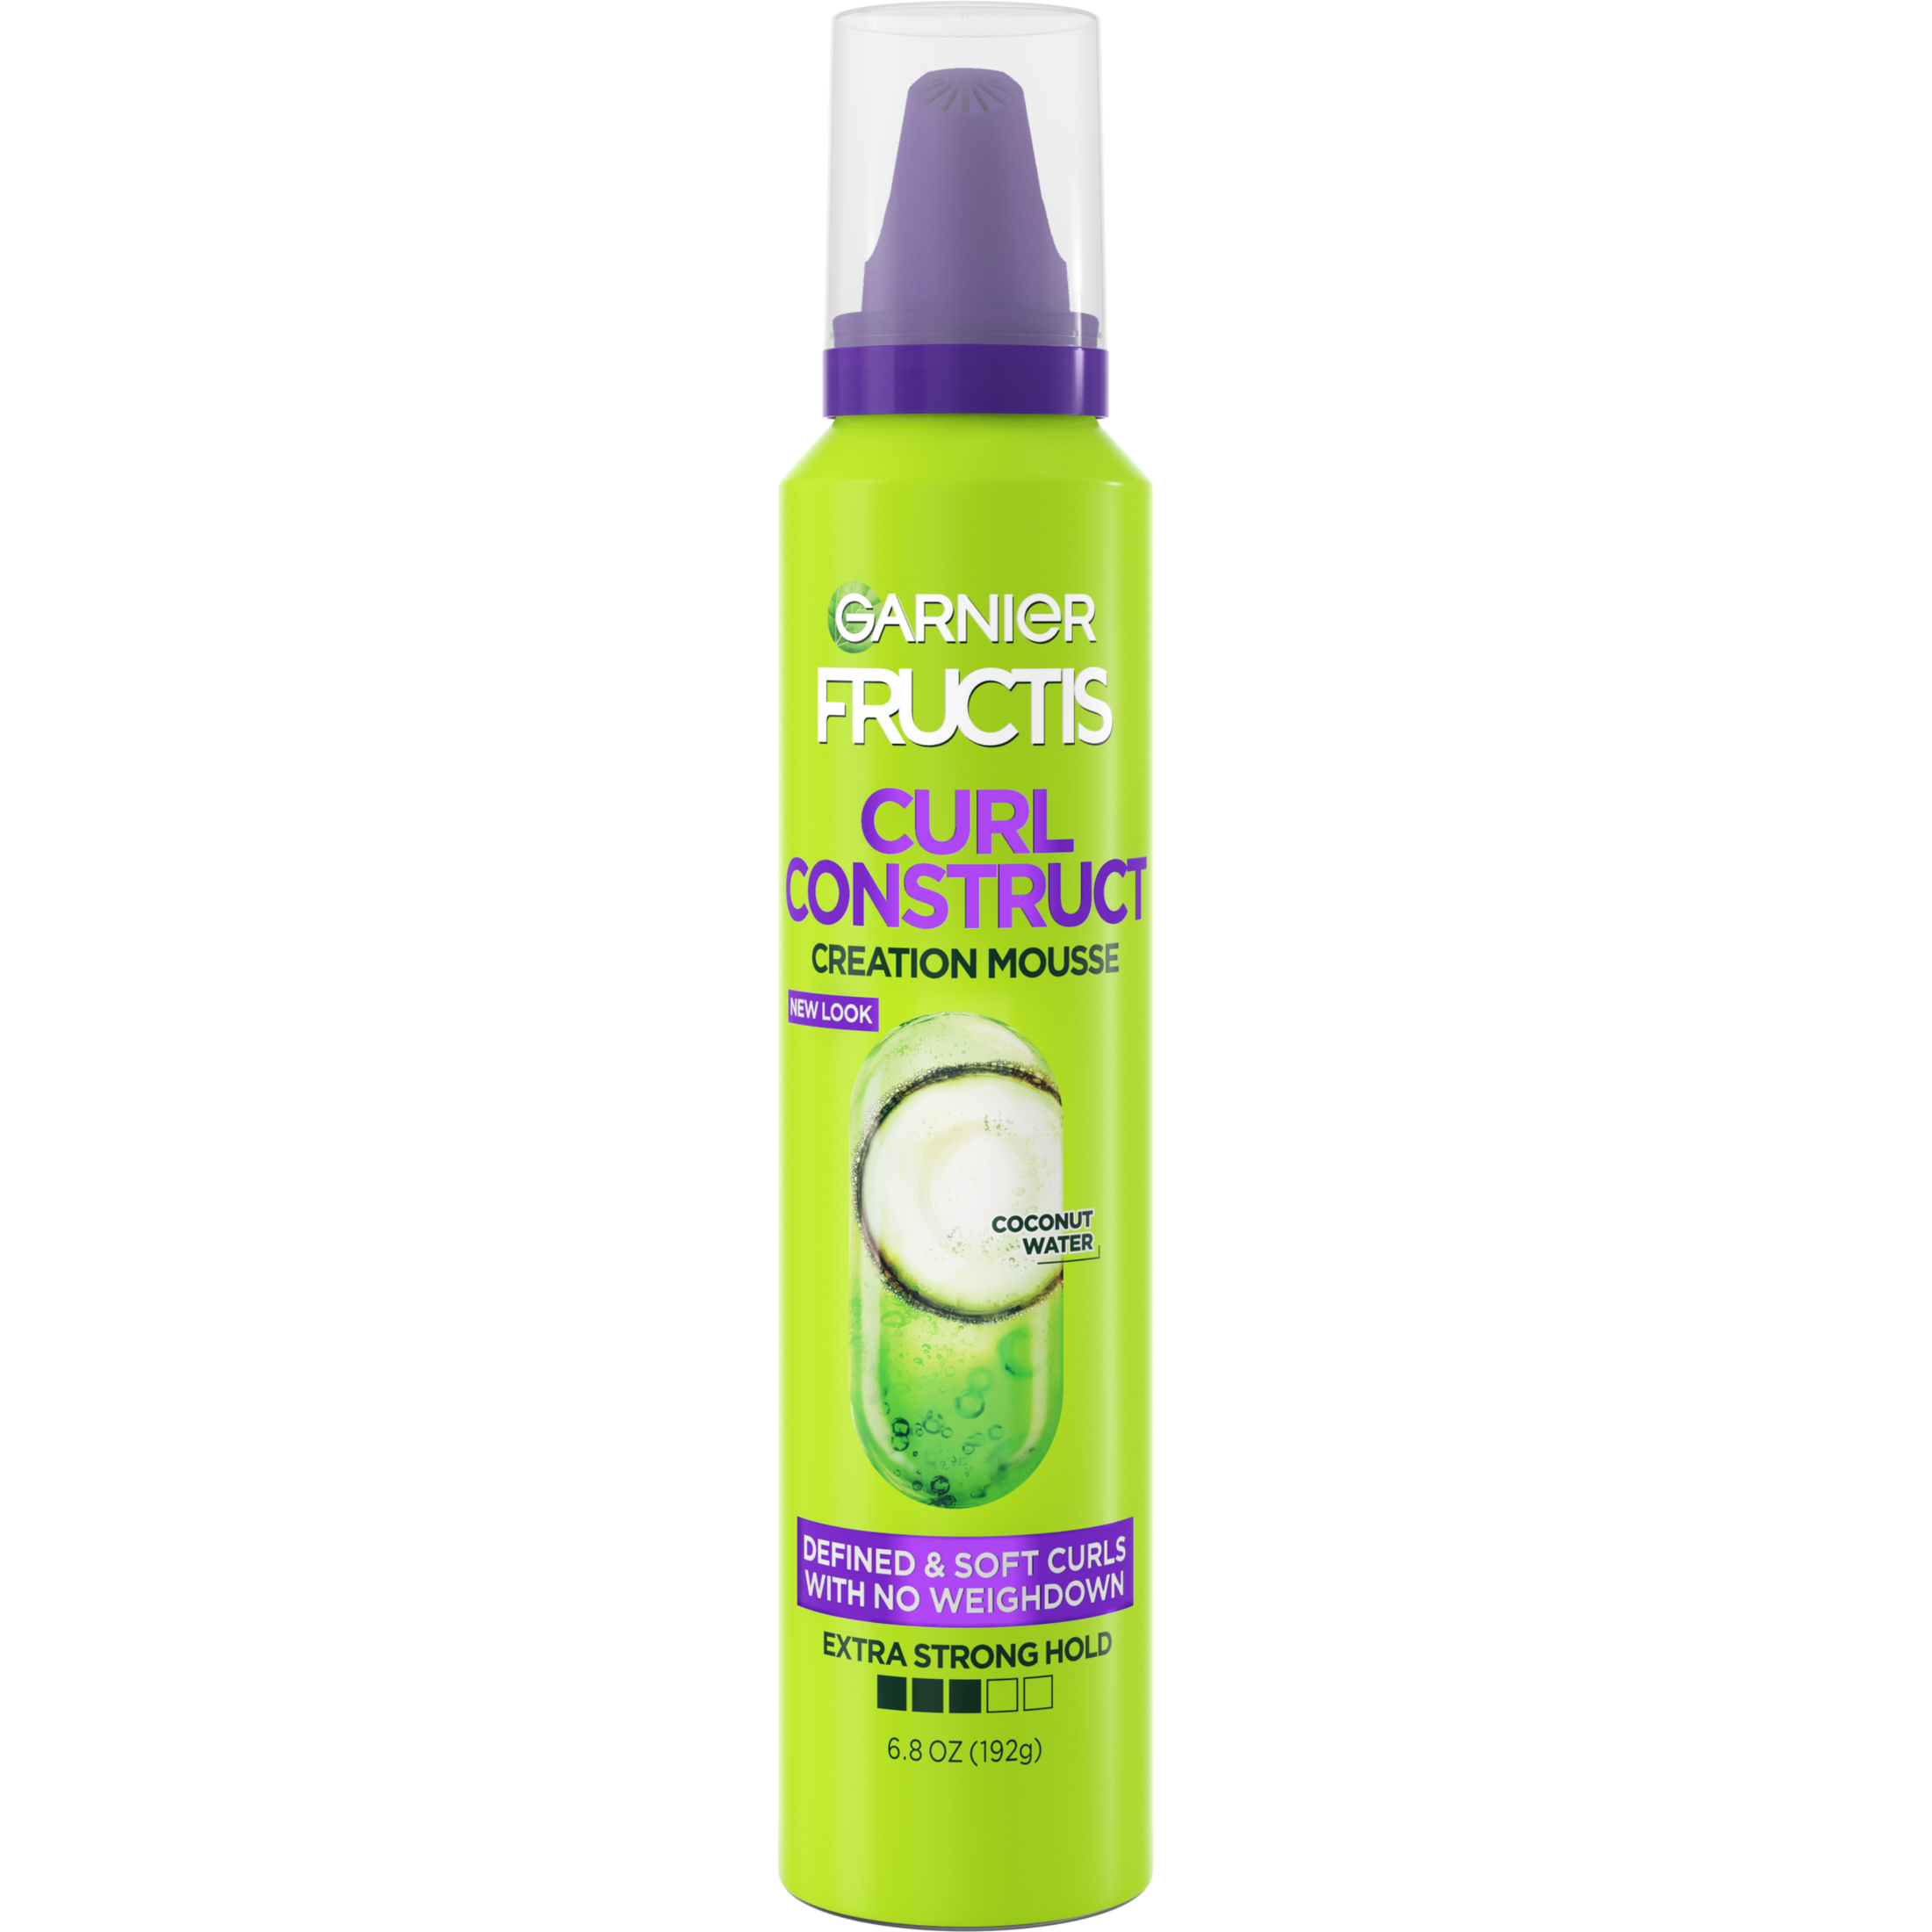 Garnier Fructis Style Curl Construct Creation Mousse, For Curly Hair, 6.8 oz - image 1 of 12